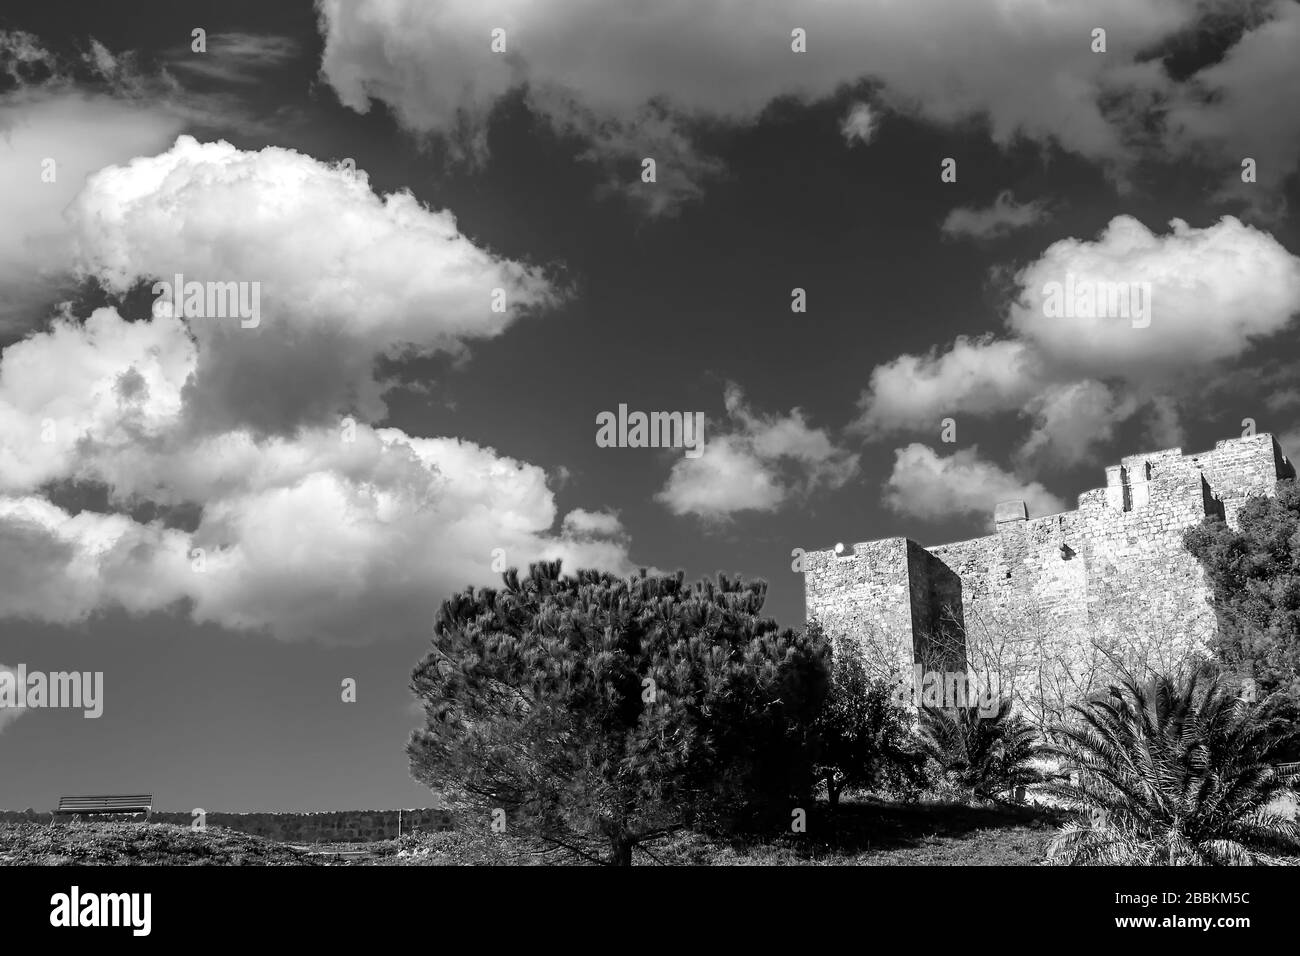 The Rocca Aldobrandesca of Talamone, Grosseto, Tuscany, Italy, against a dramatic and picturesque sky, in black and white Stock Photo